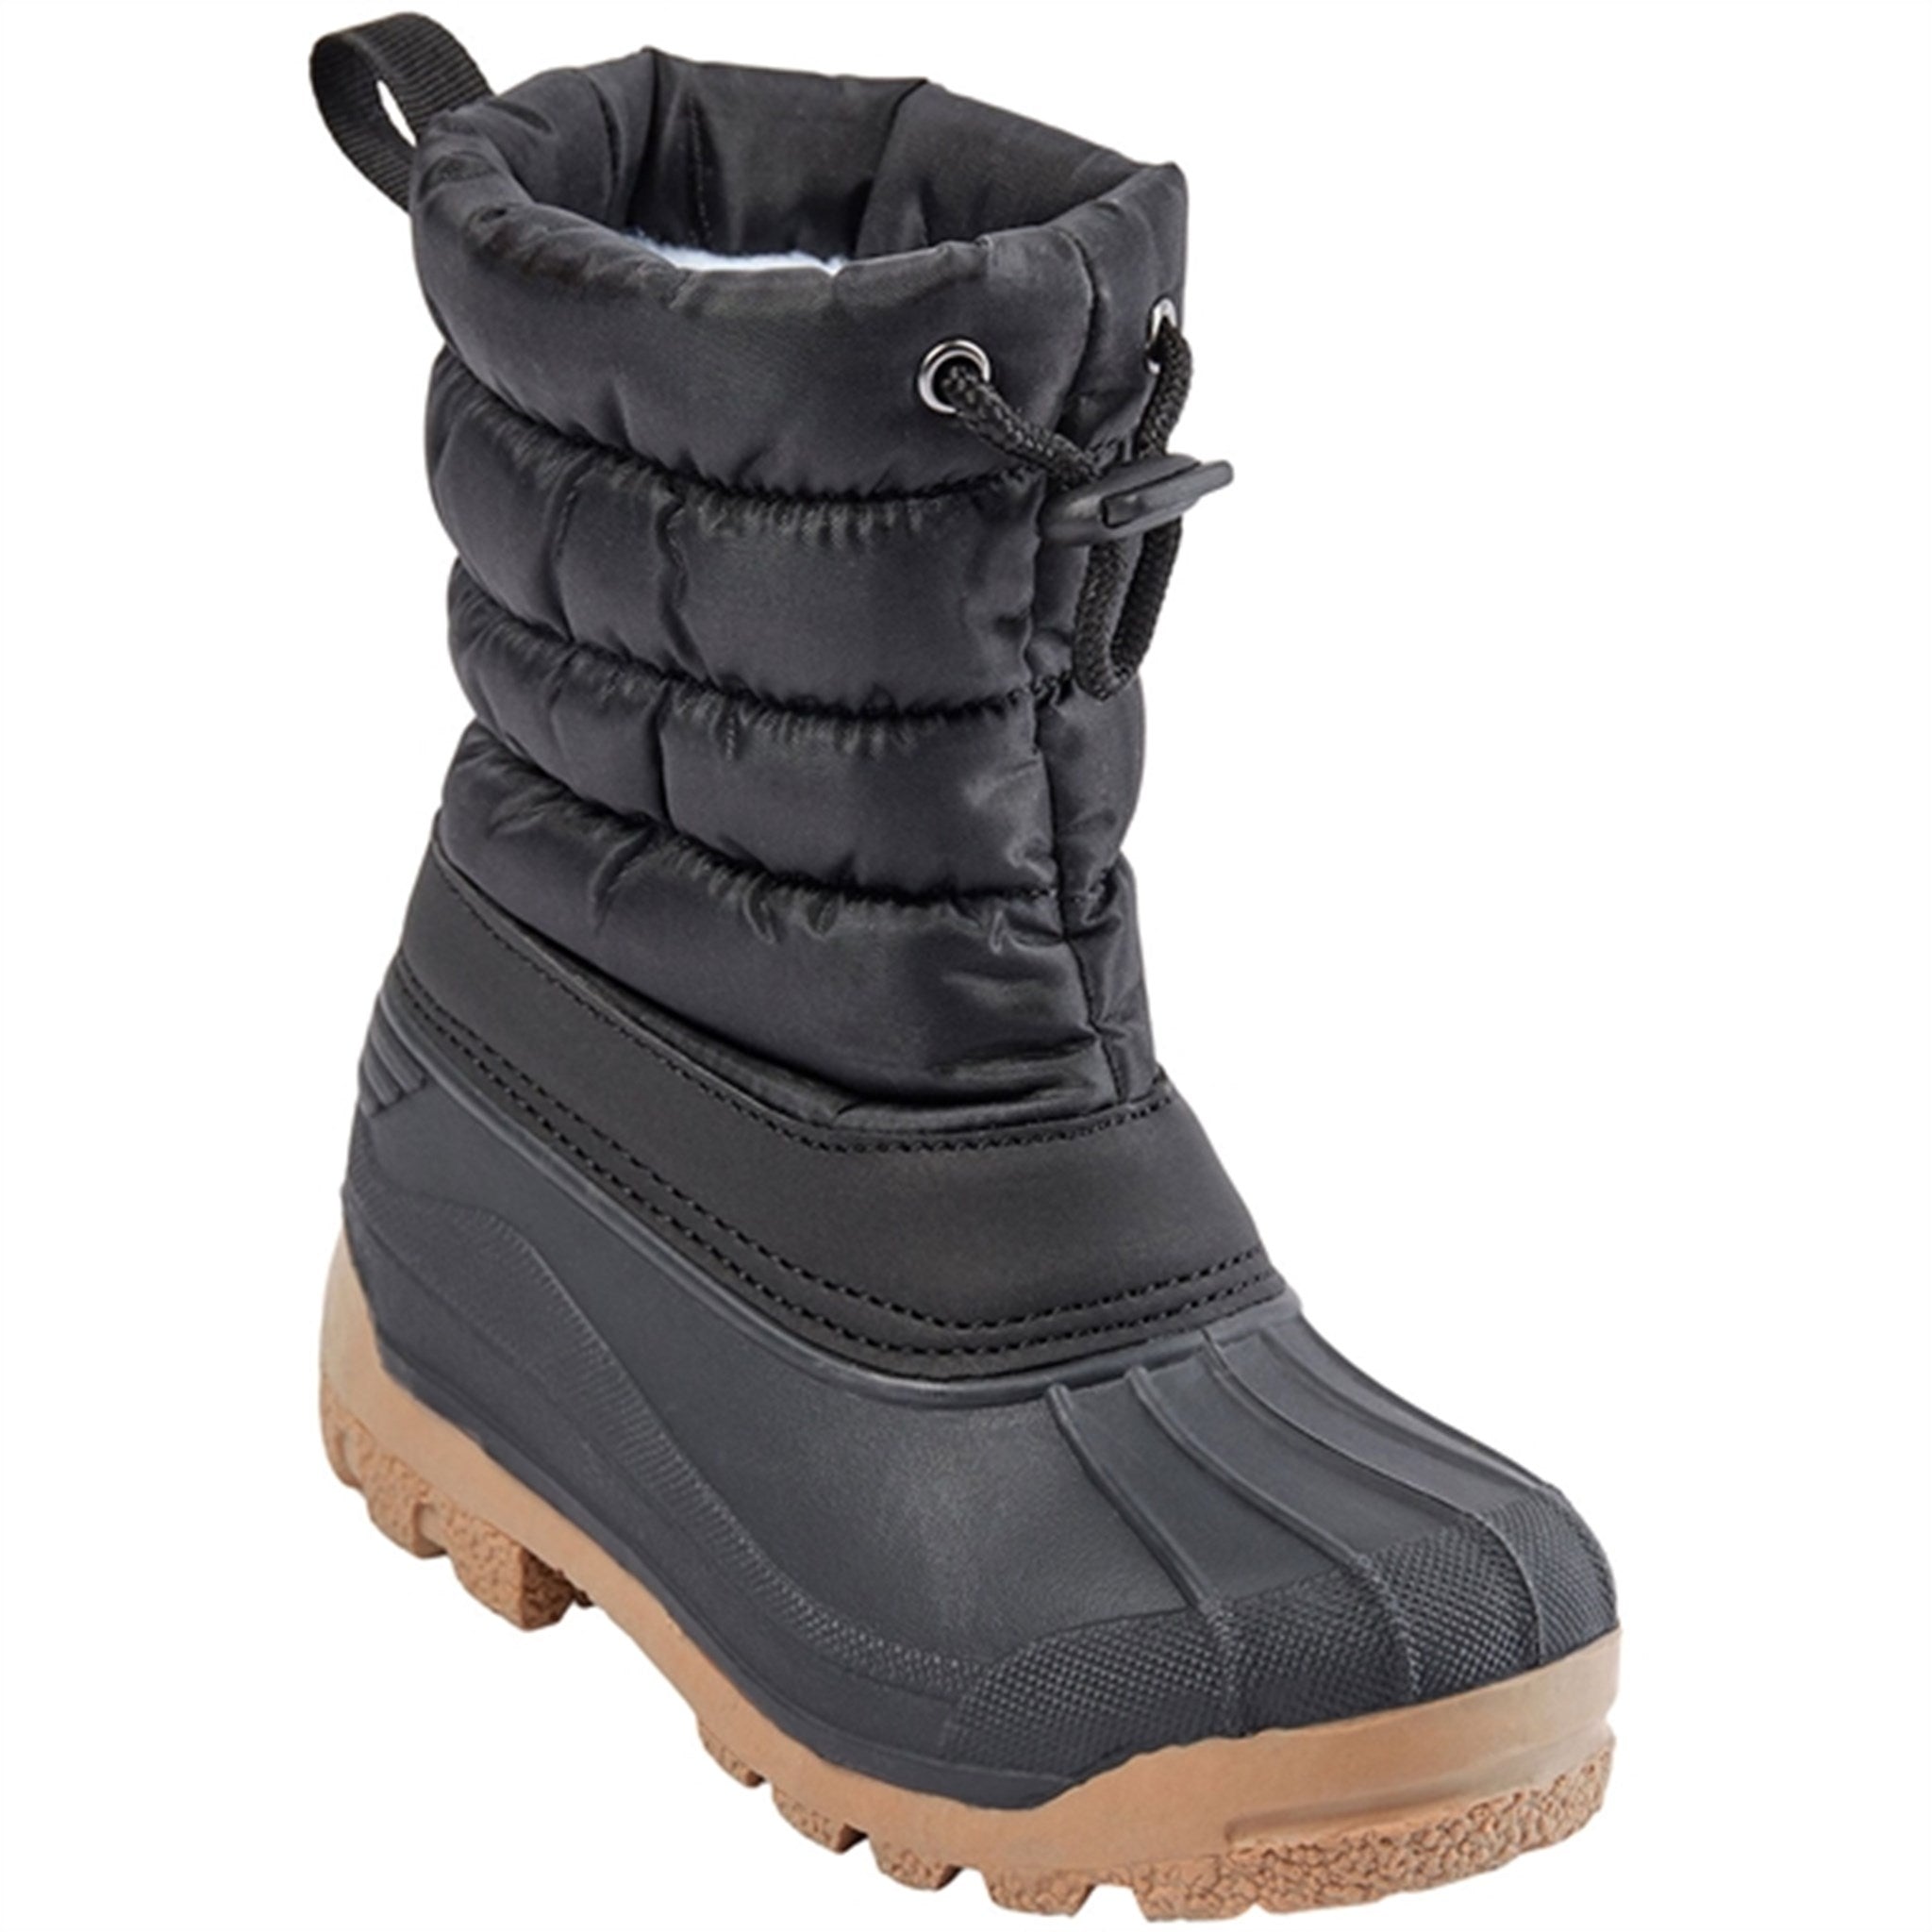 Sofie Schnoor Thermo Boots Black 4